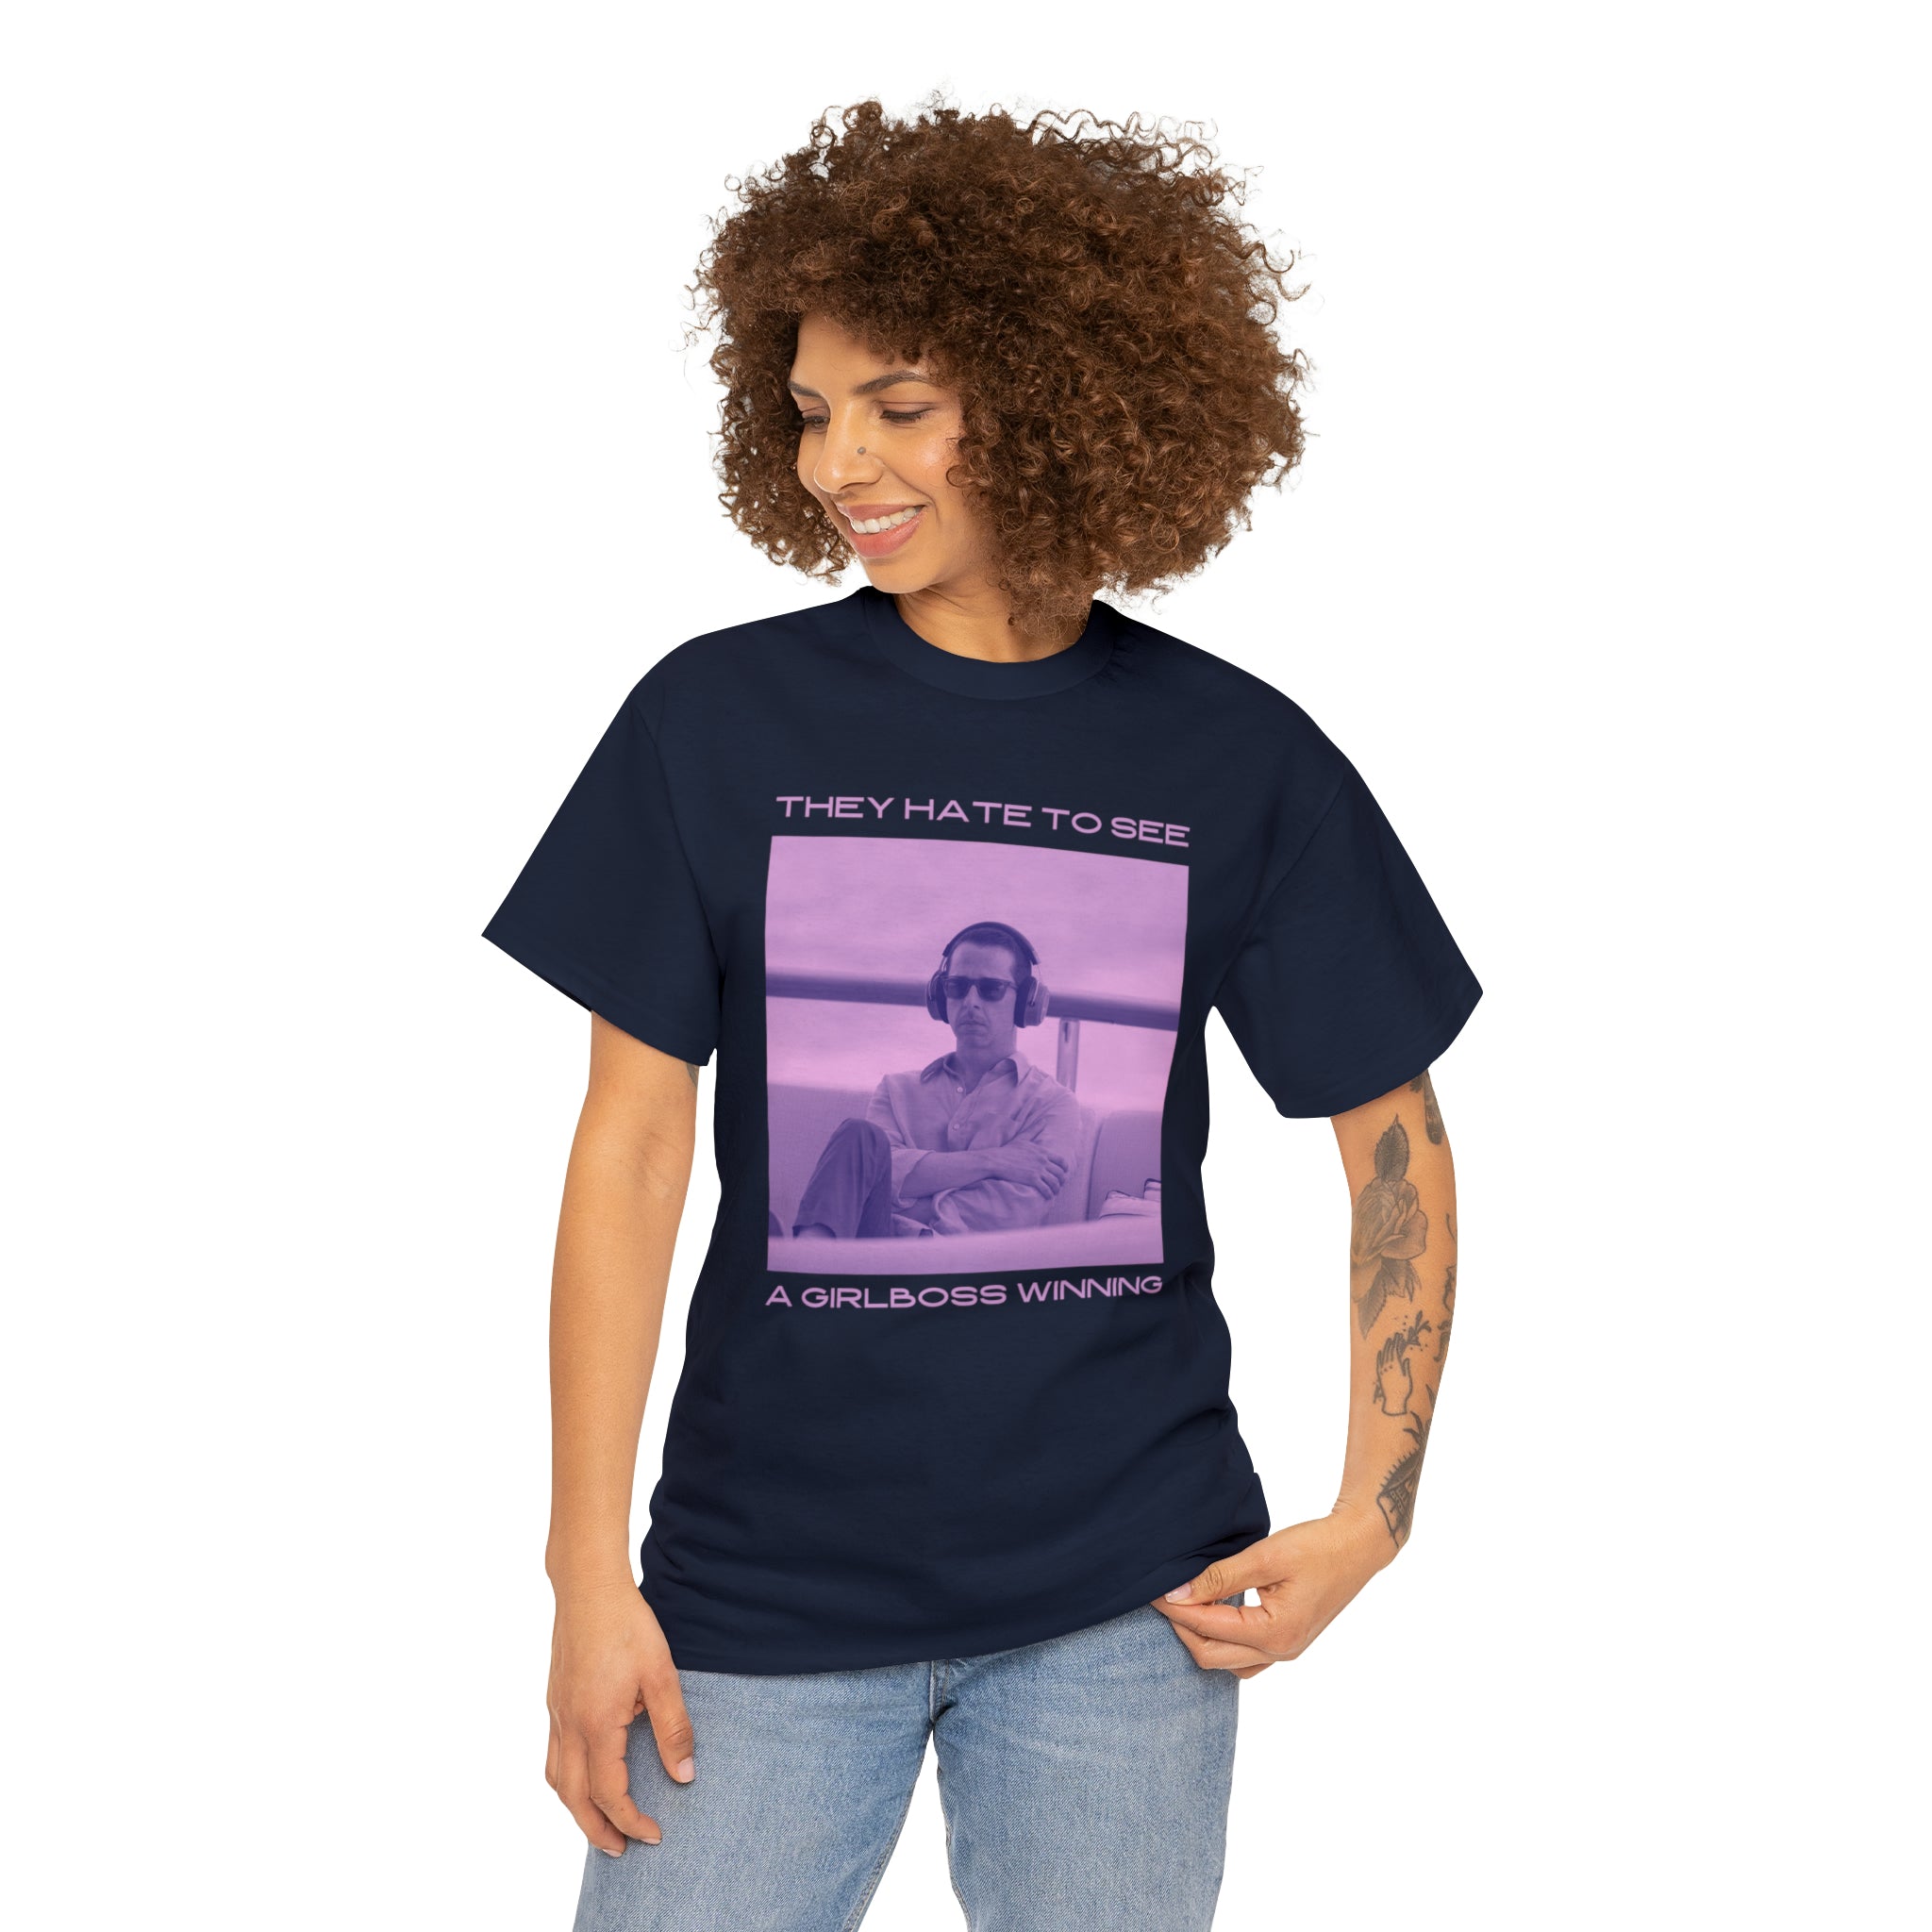 Kendall Roy They hate to see a girlboss winning - Unisex Heavy Cotton Tee